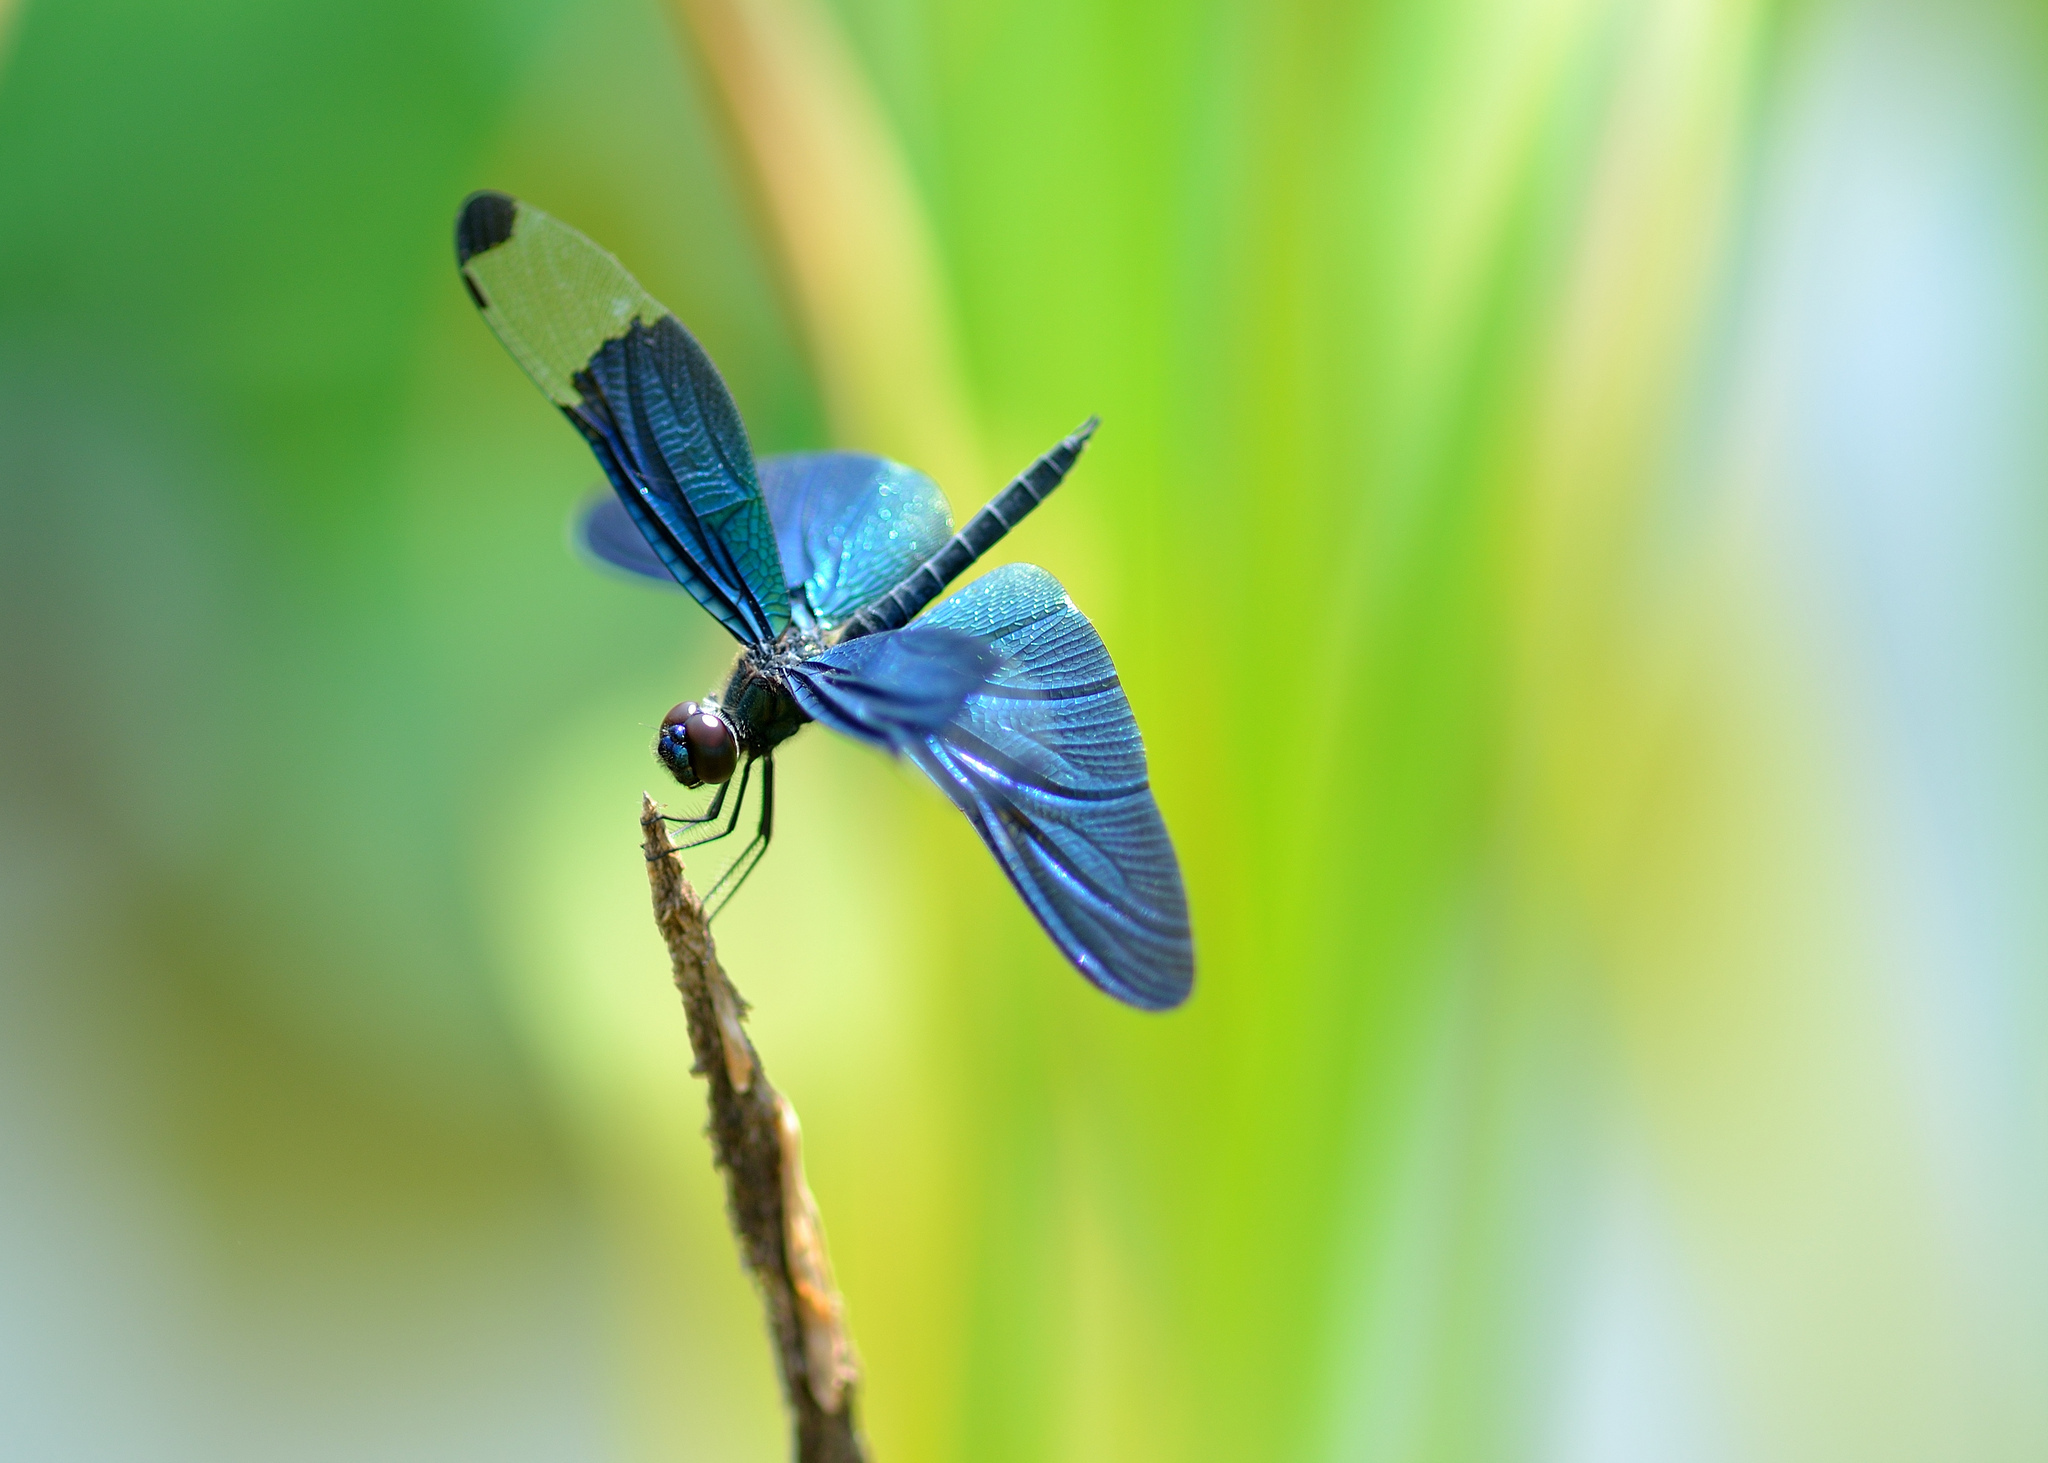 Blue Dragonfly Wallpaper For Android